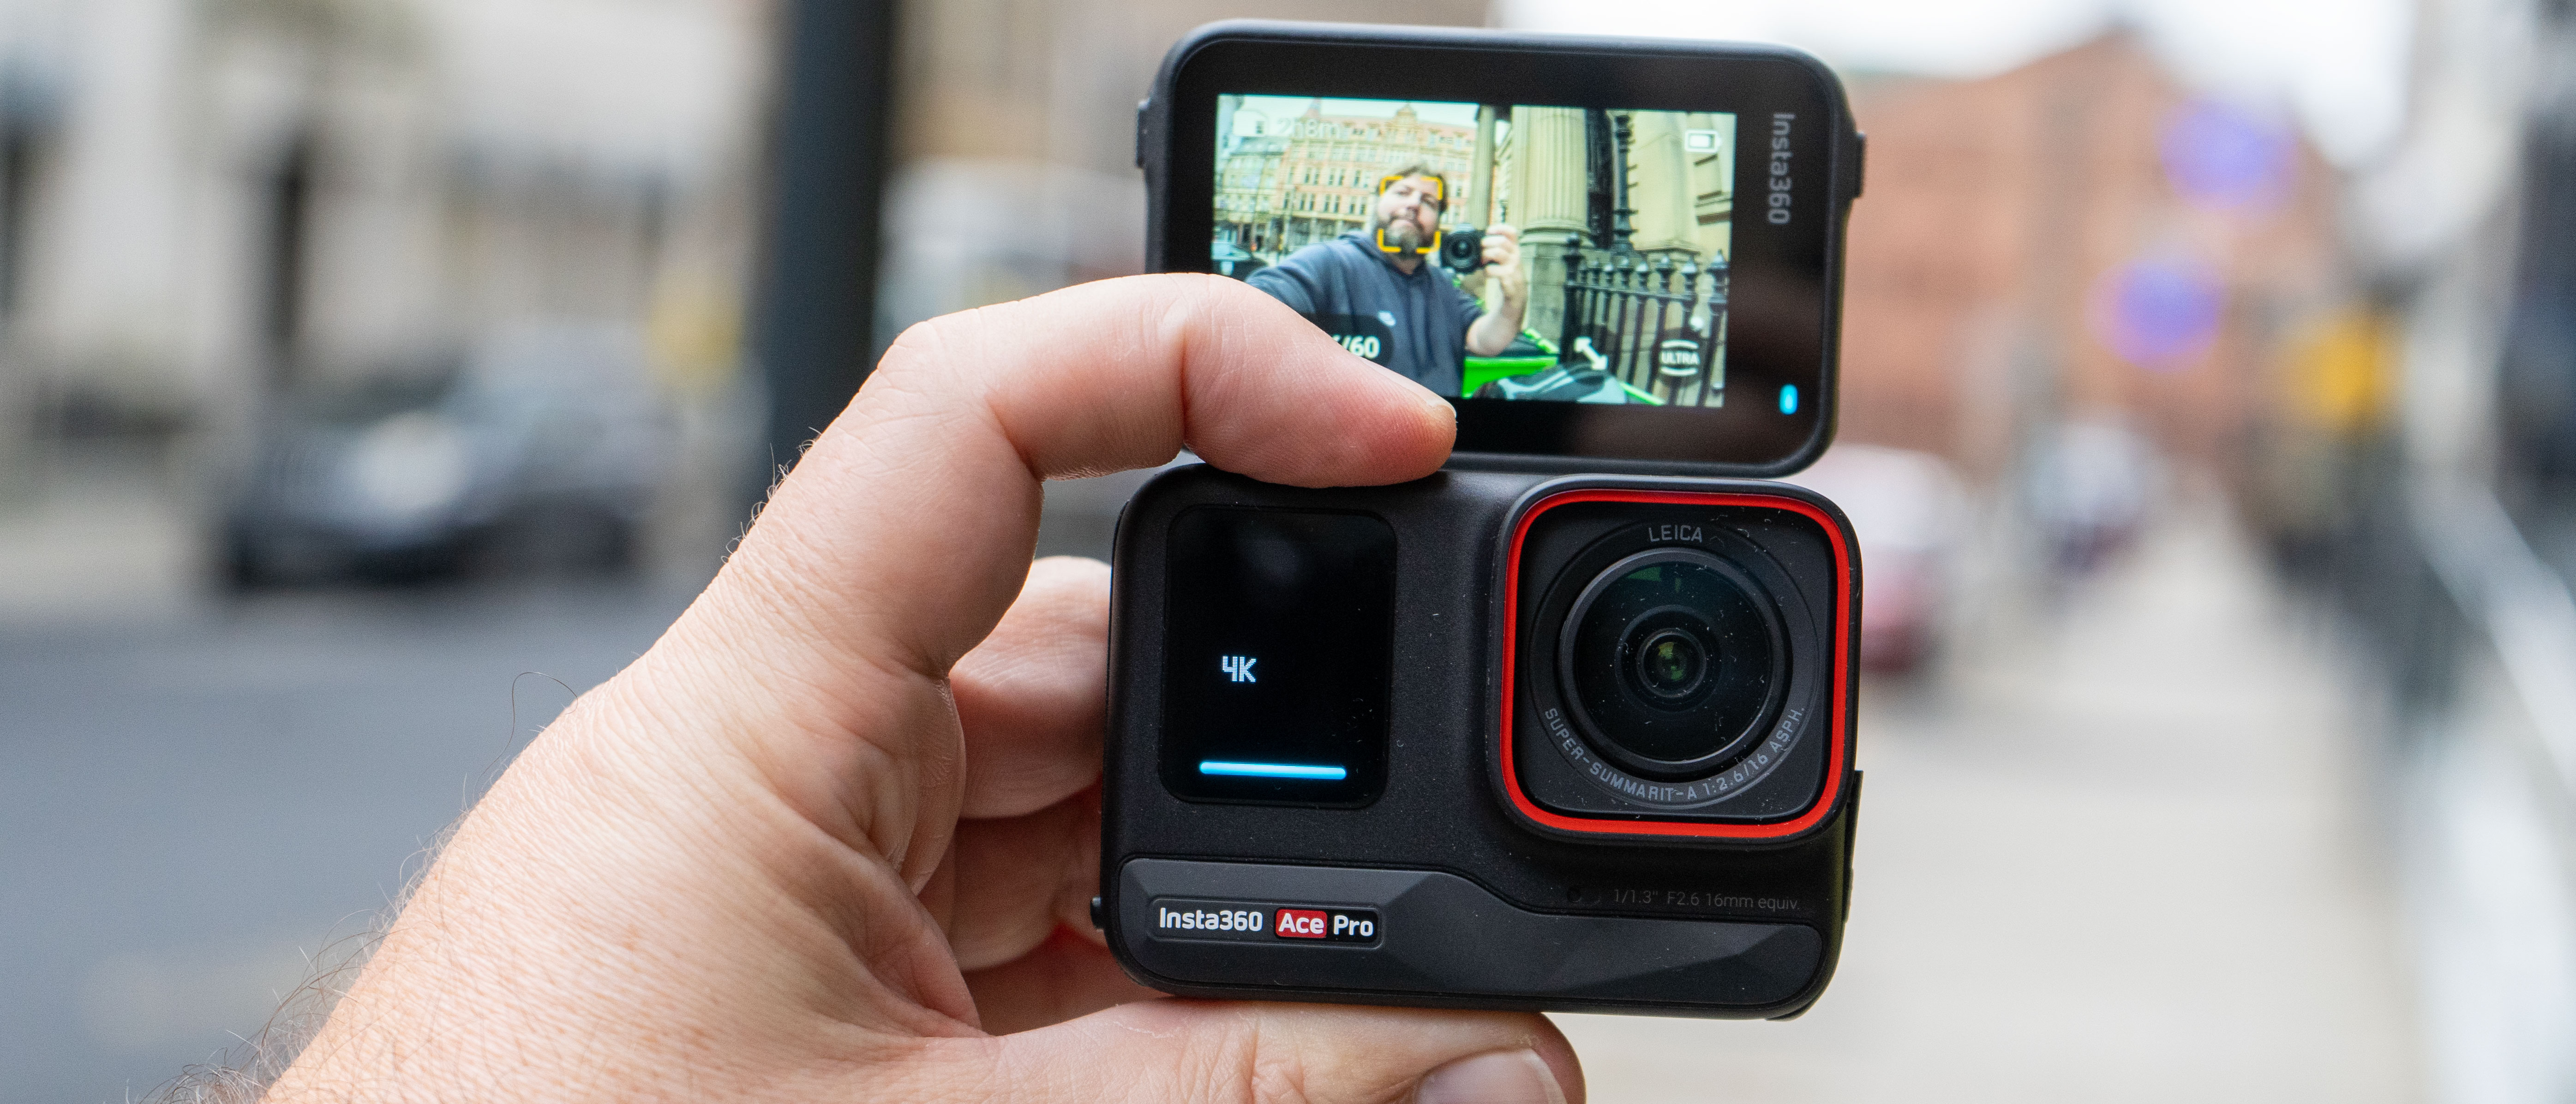 Review of the New Insta360 Ace Pro - An Awesome Action Camera for